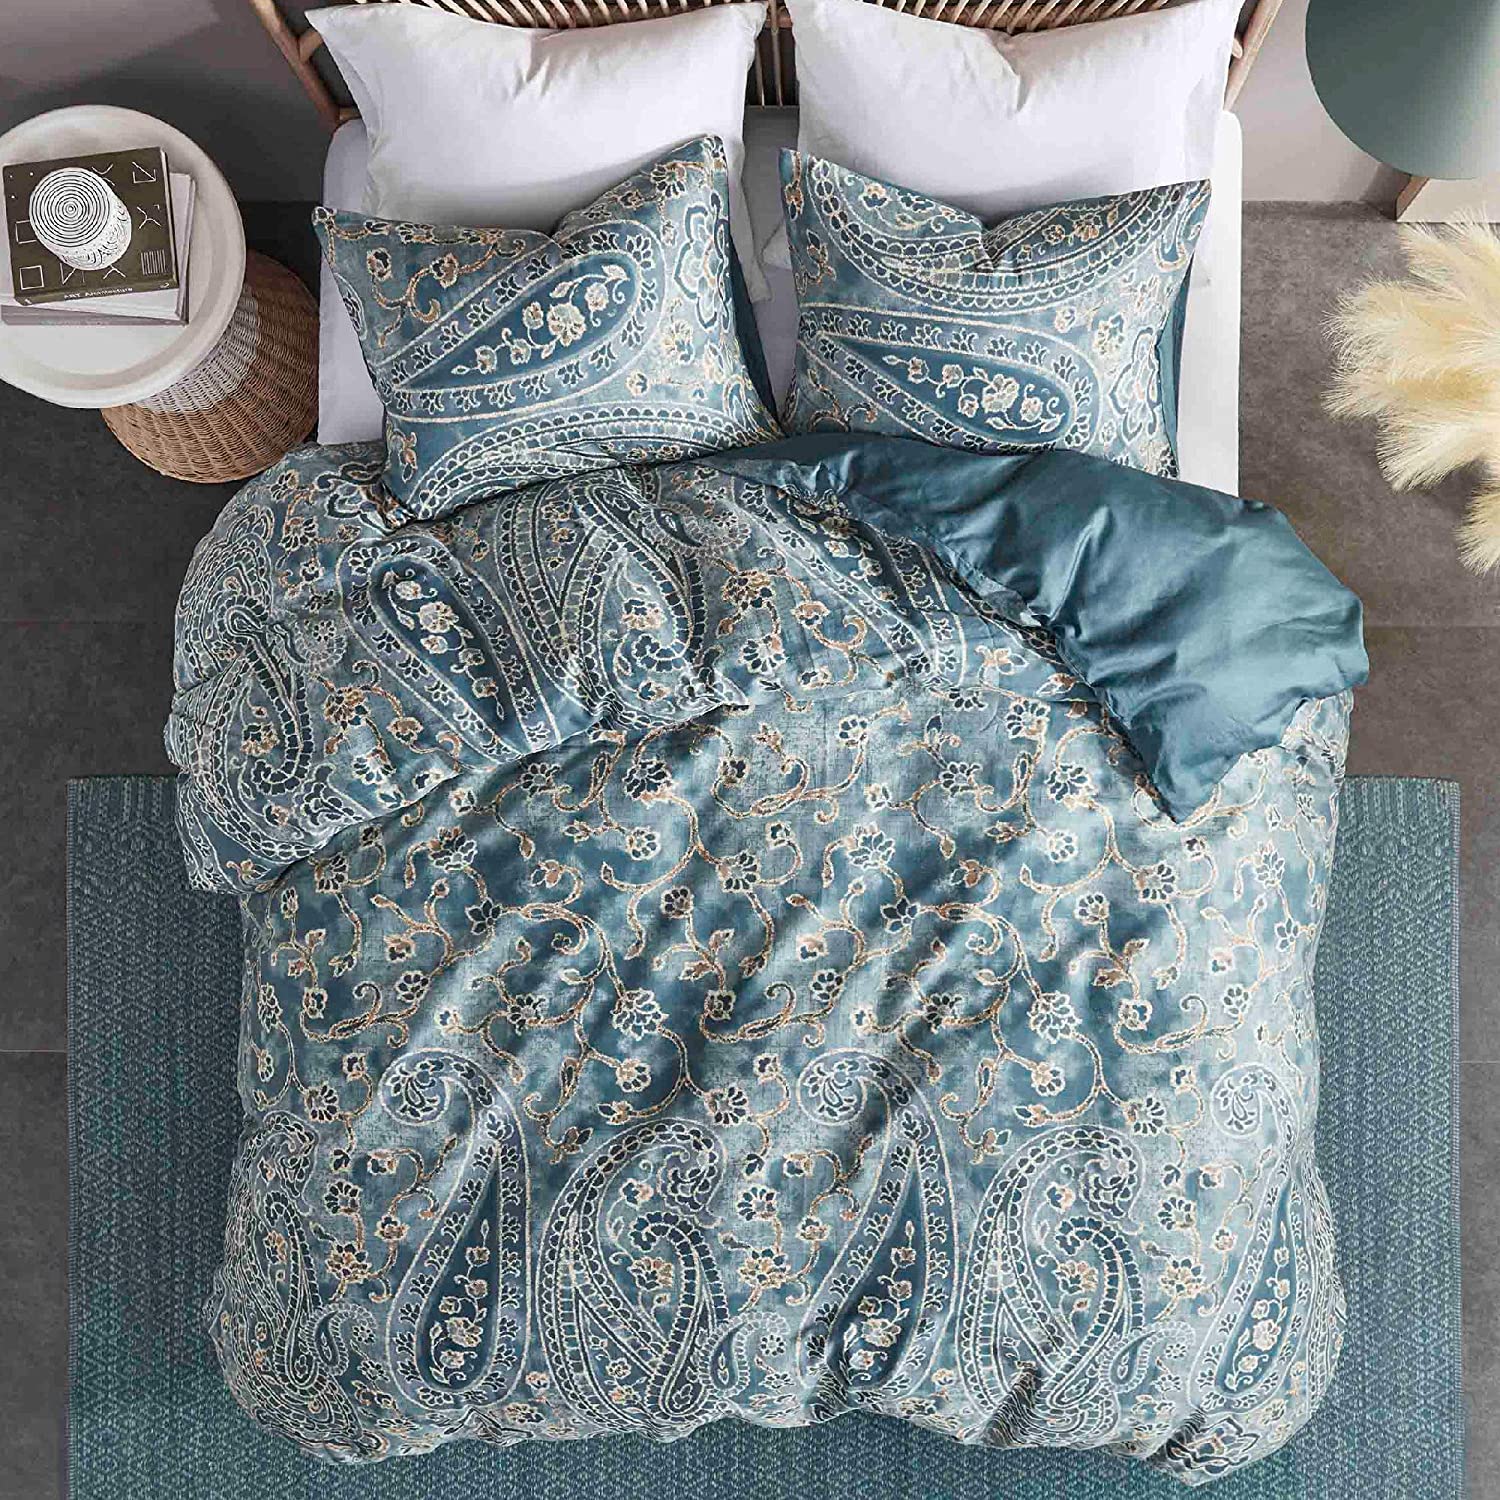 Price:$78.99  DESIGN Reversible 100% Cotton Sateen Duvet - Breathable Comforter Cover, Modern All Season Bedding Set with Sham (Insert Excluded), Belcourt, Paisley Blue King/Cal King(104"x90") : Home & Kitchen